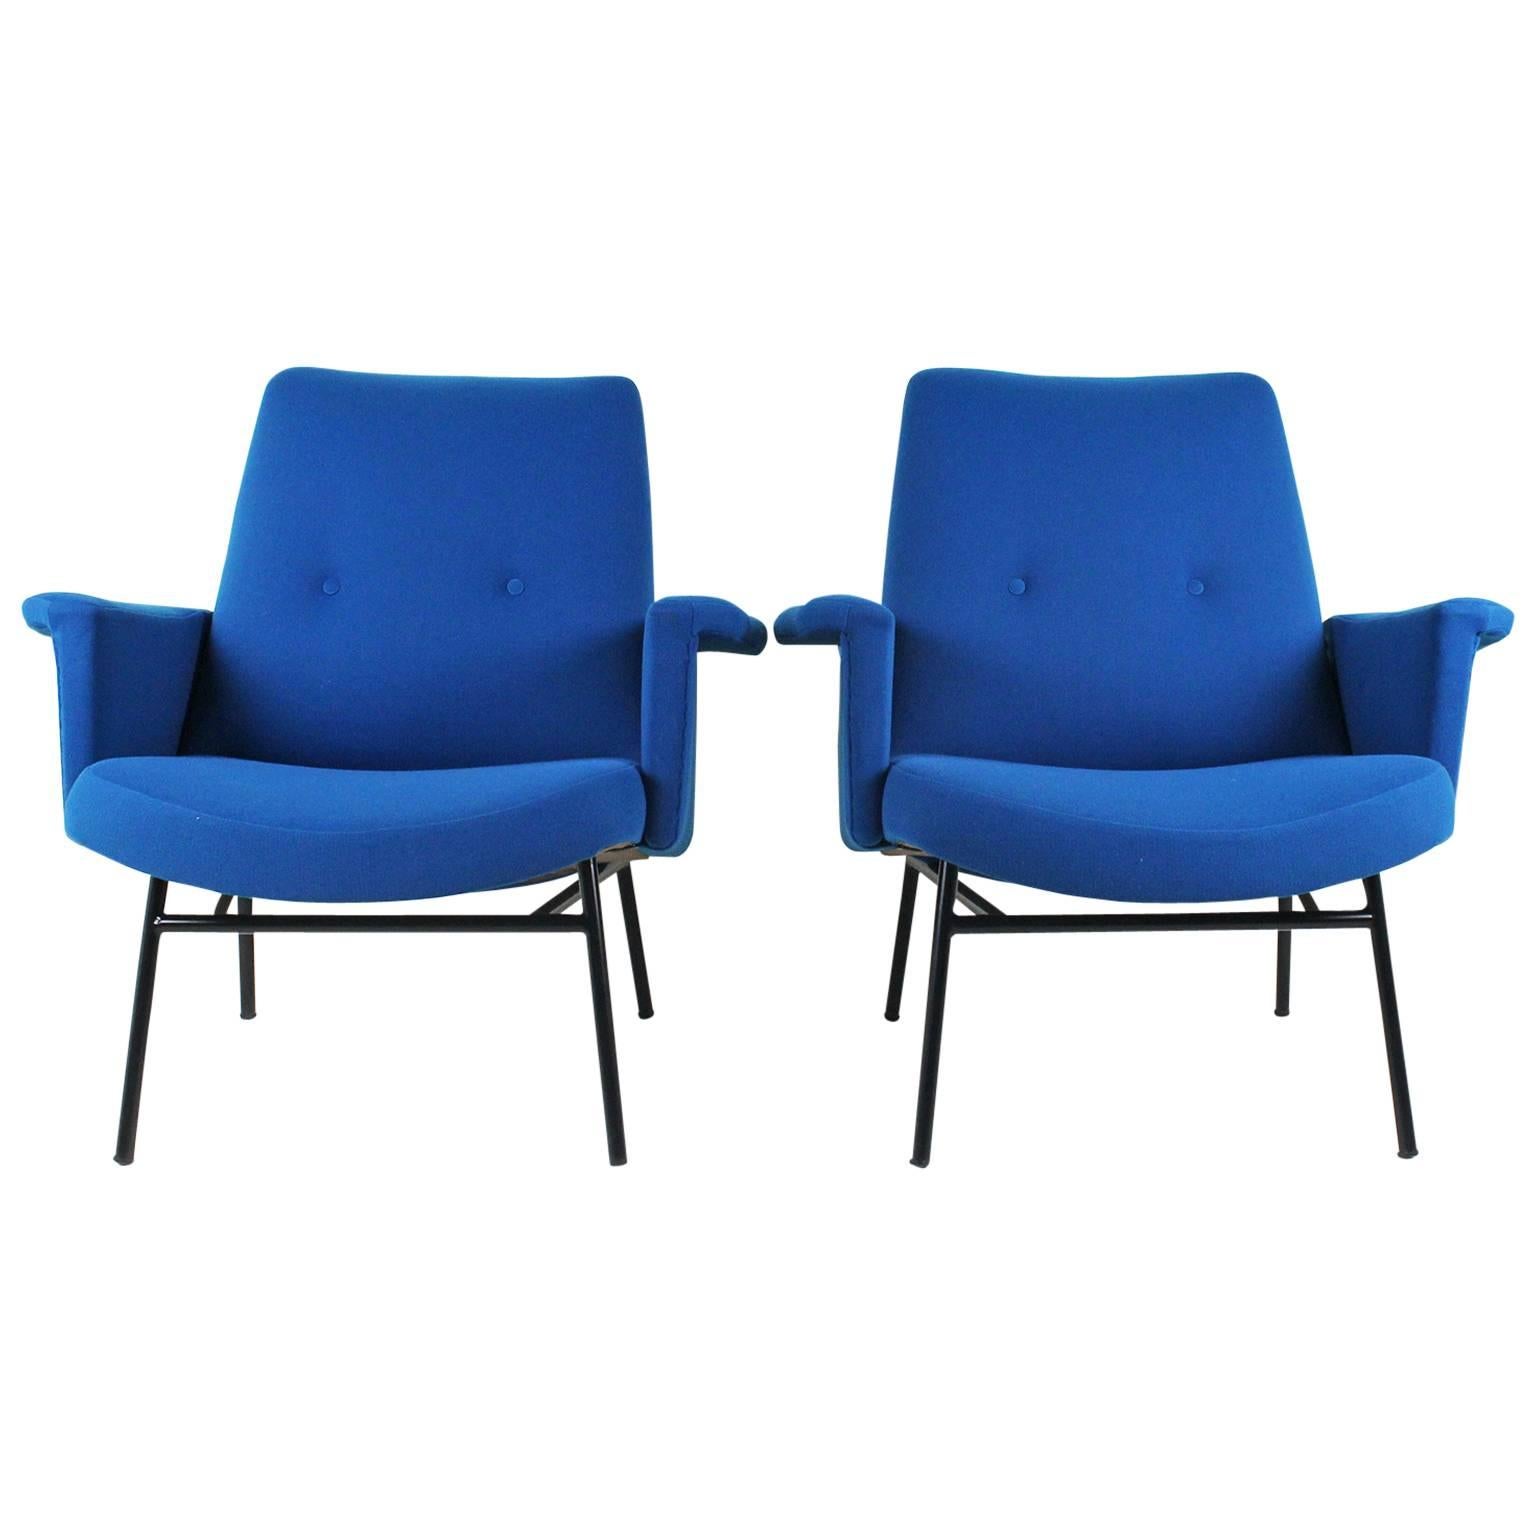 Pair of Armchairs by Pierre Guariche, Steiner, 1950s For Sale